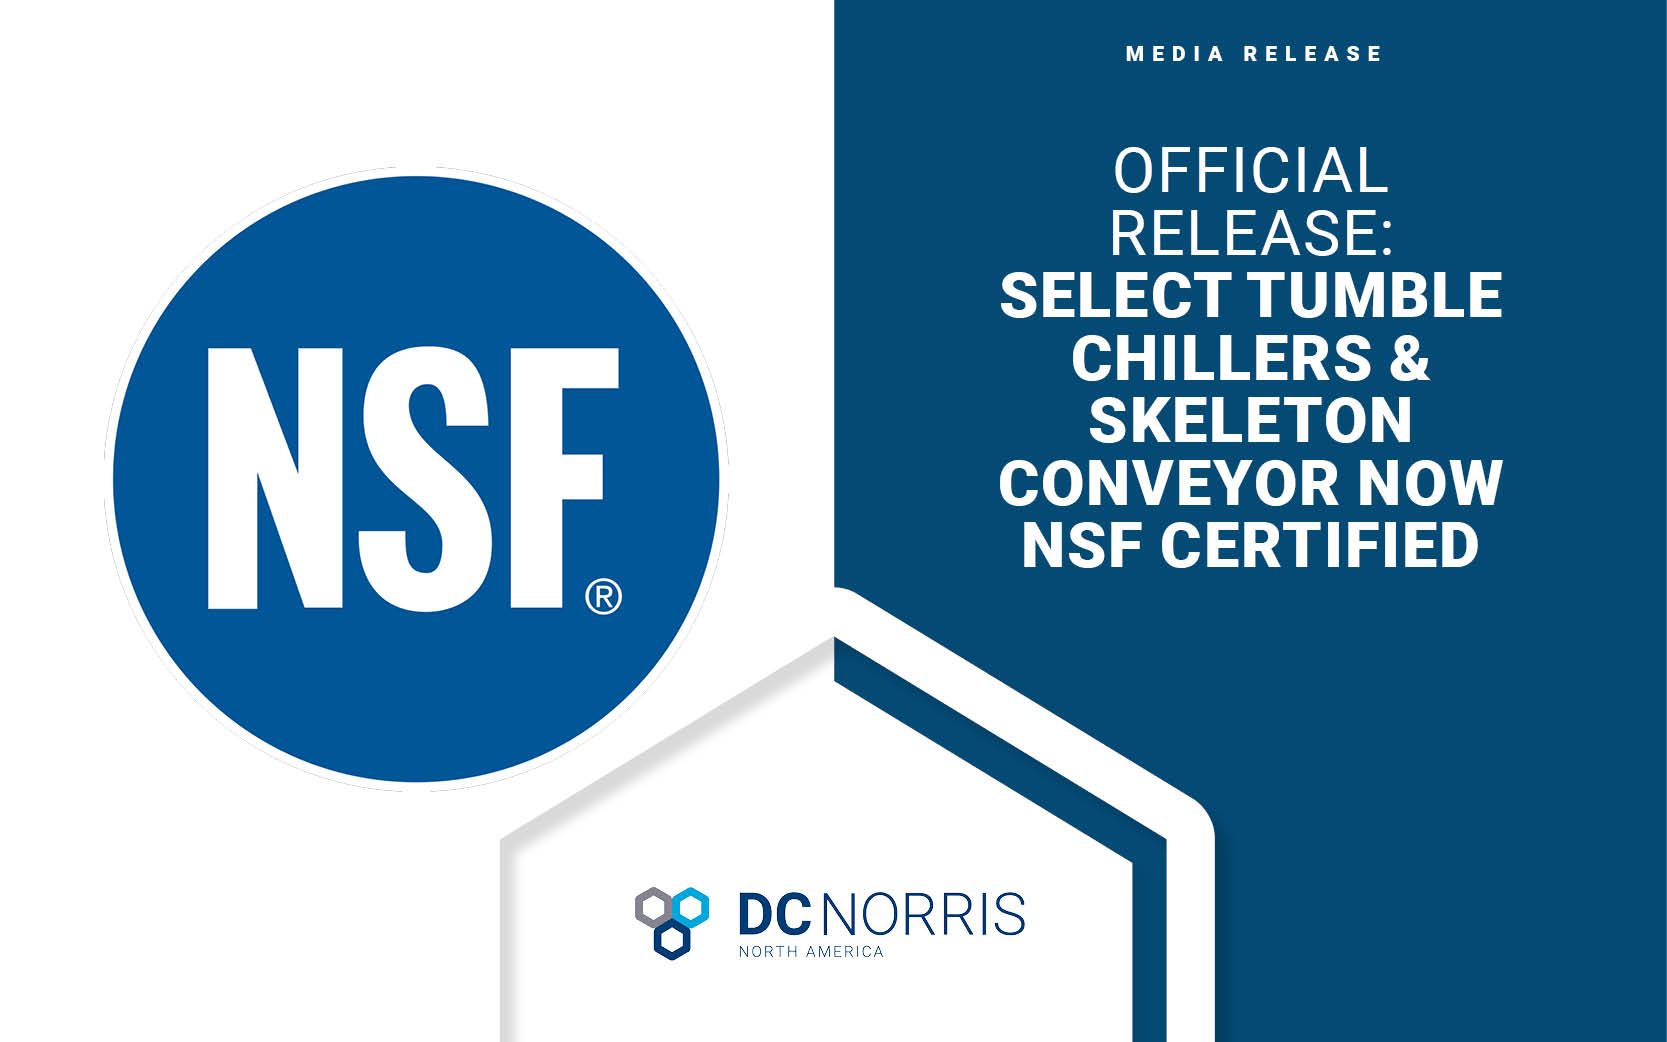 The NSF logo is on the left side, in blue on a white background. The right side of the image is dark blue with white text that reads: Official Release - Select Tumble Chillers & Skeleton Conveyor Now NSF Certified